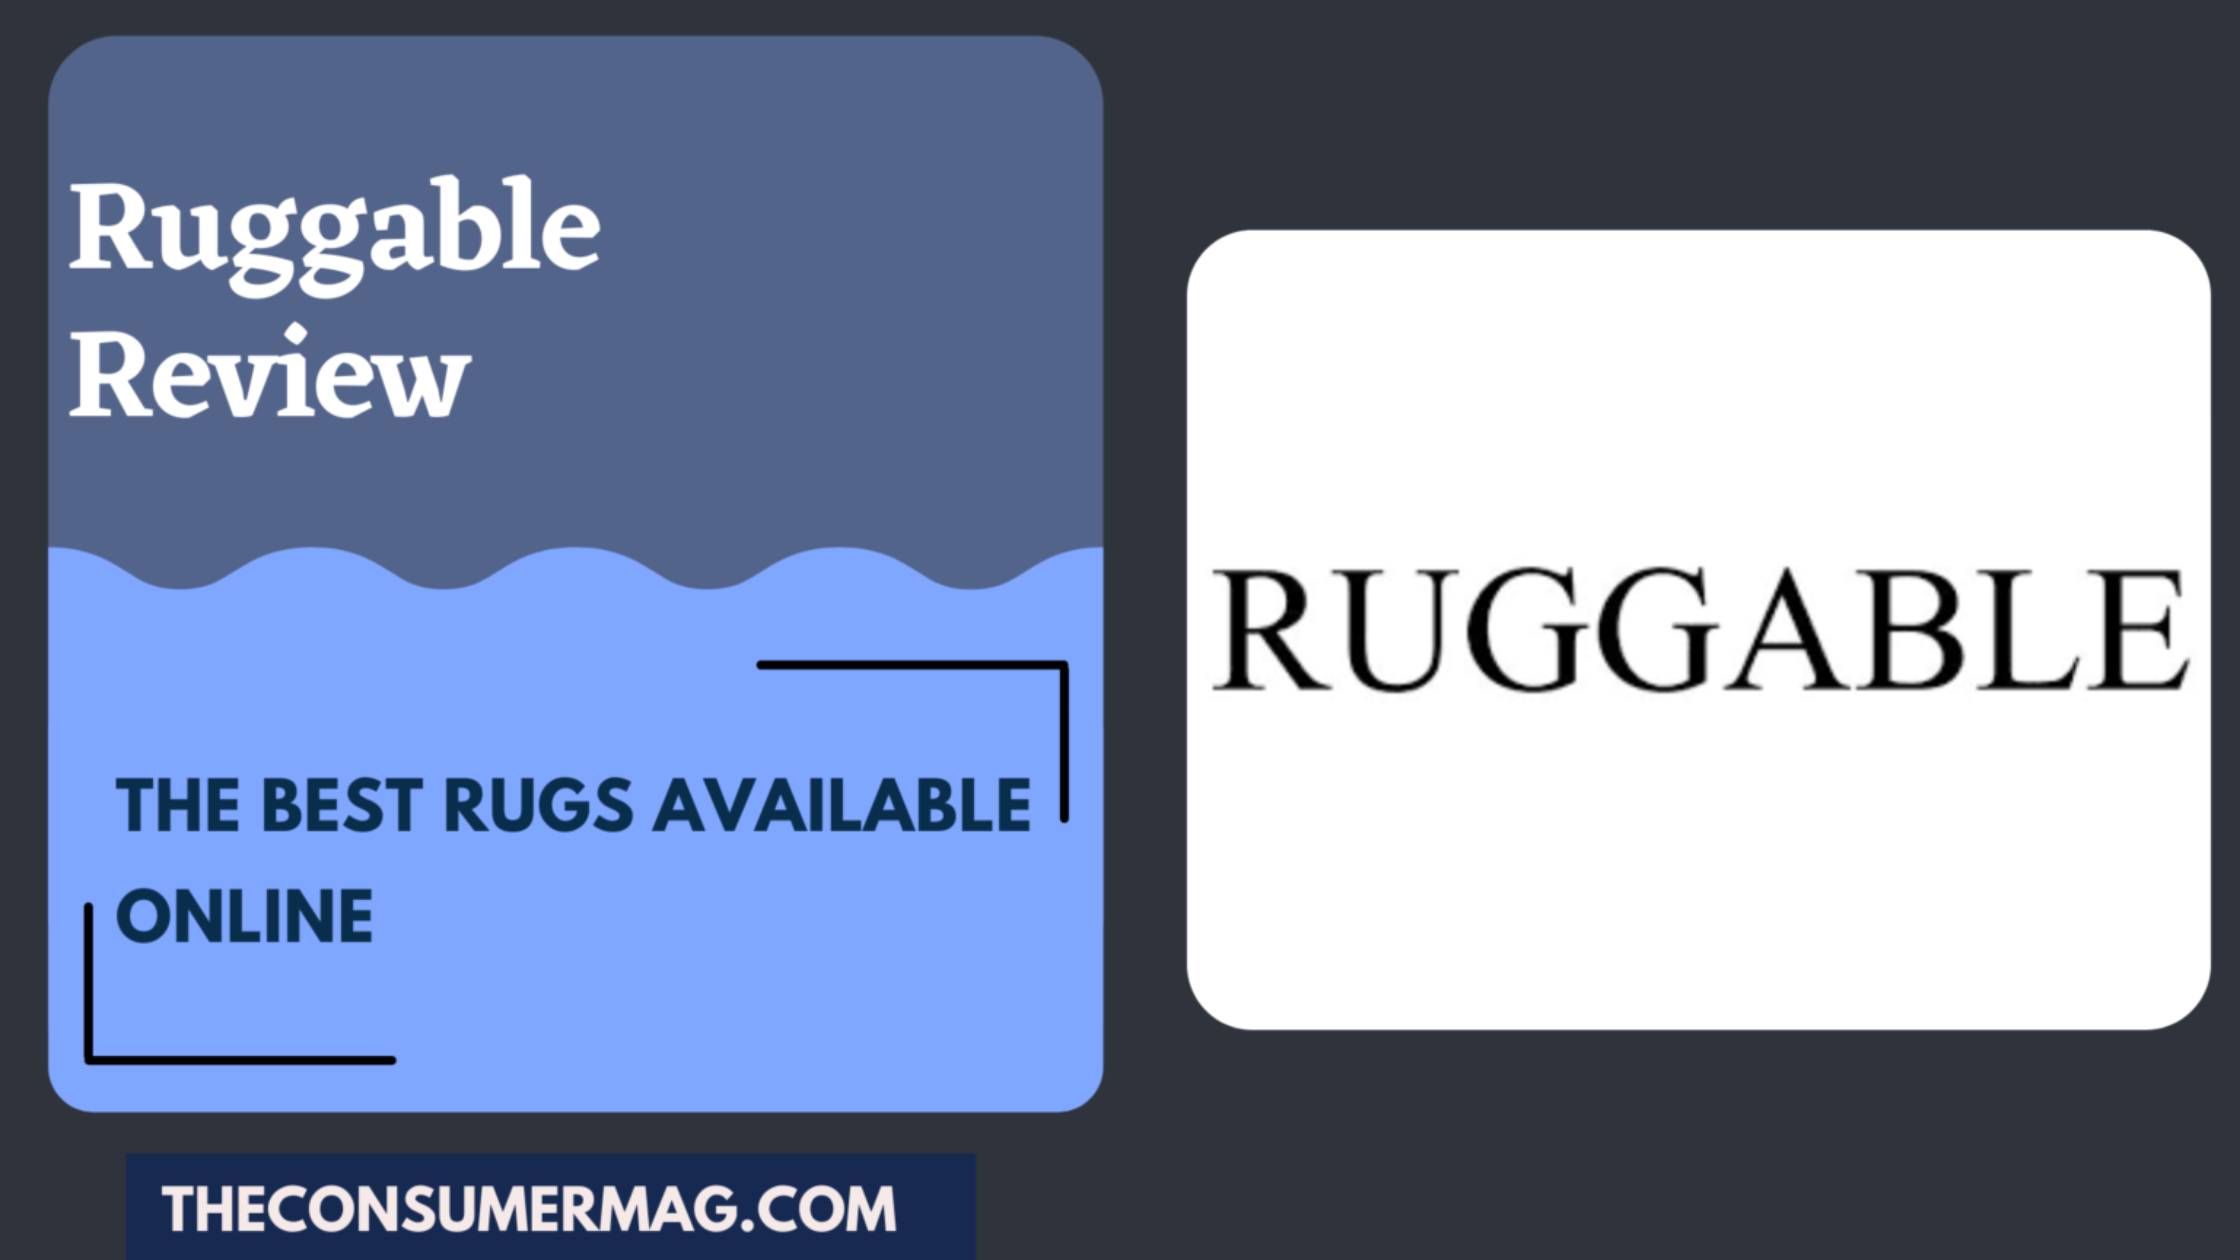 Ruggable featured image